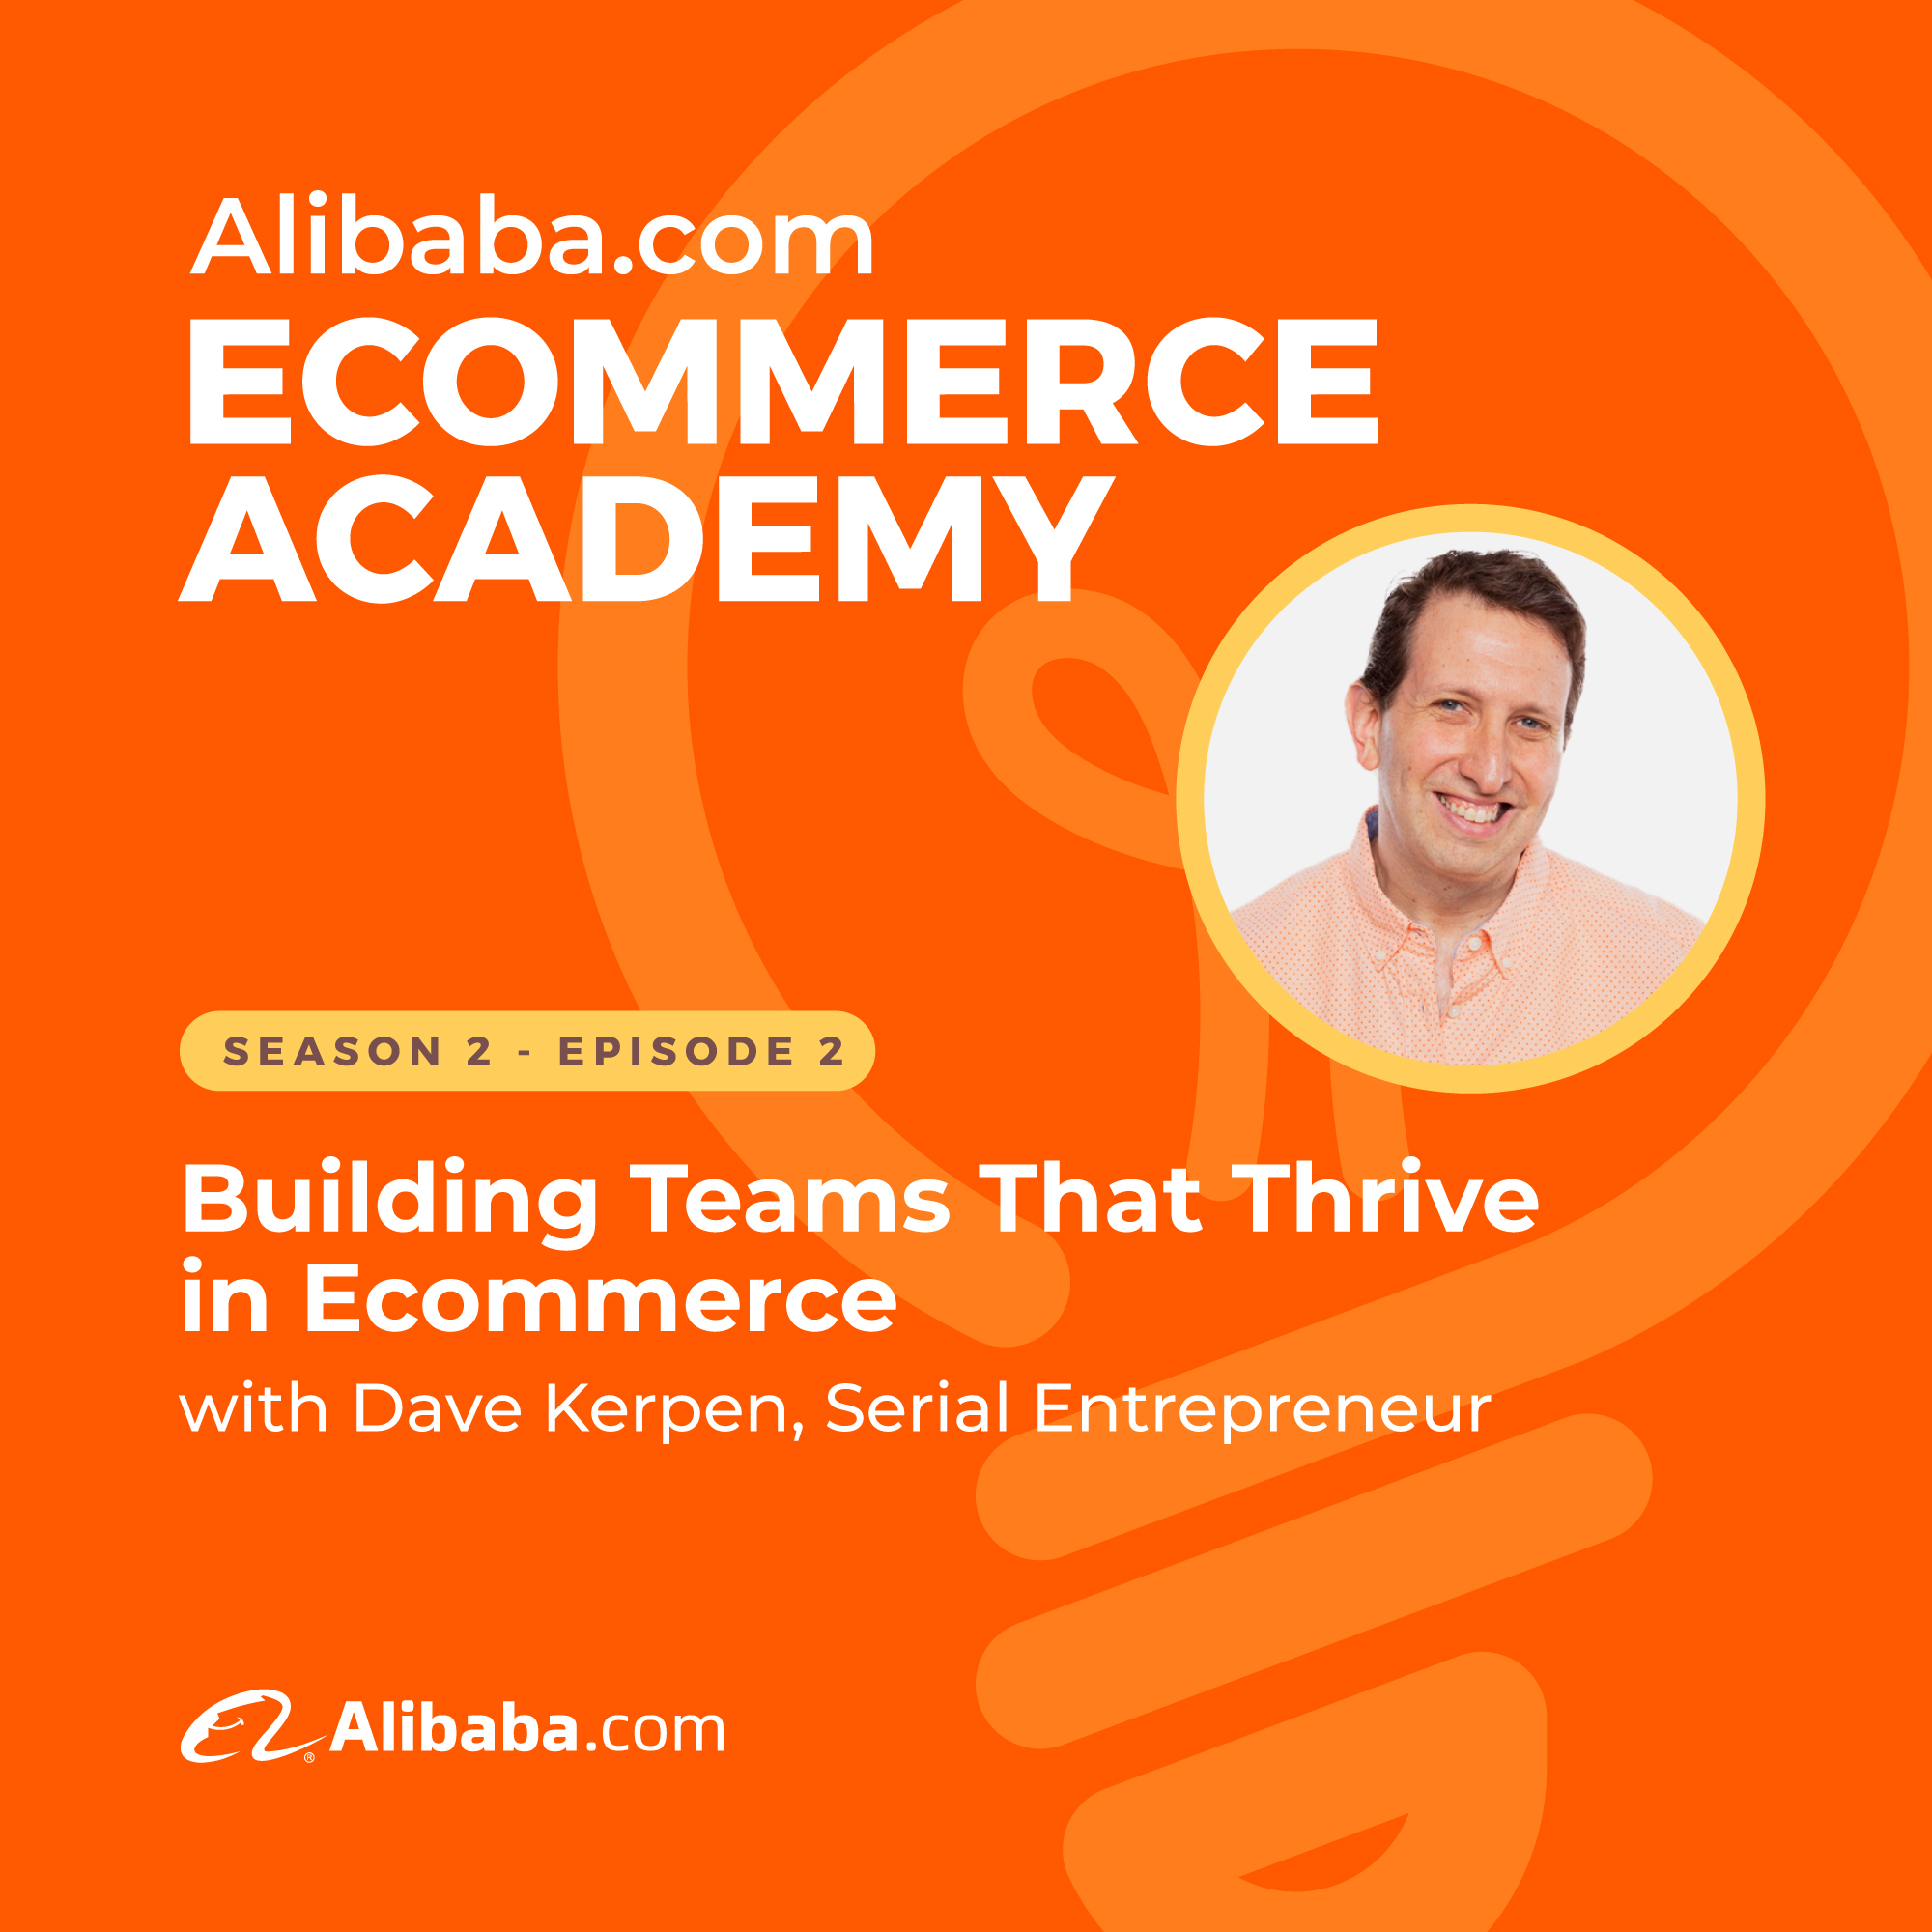 Building Teams That Thrive in Ecommerce